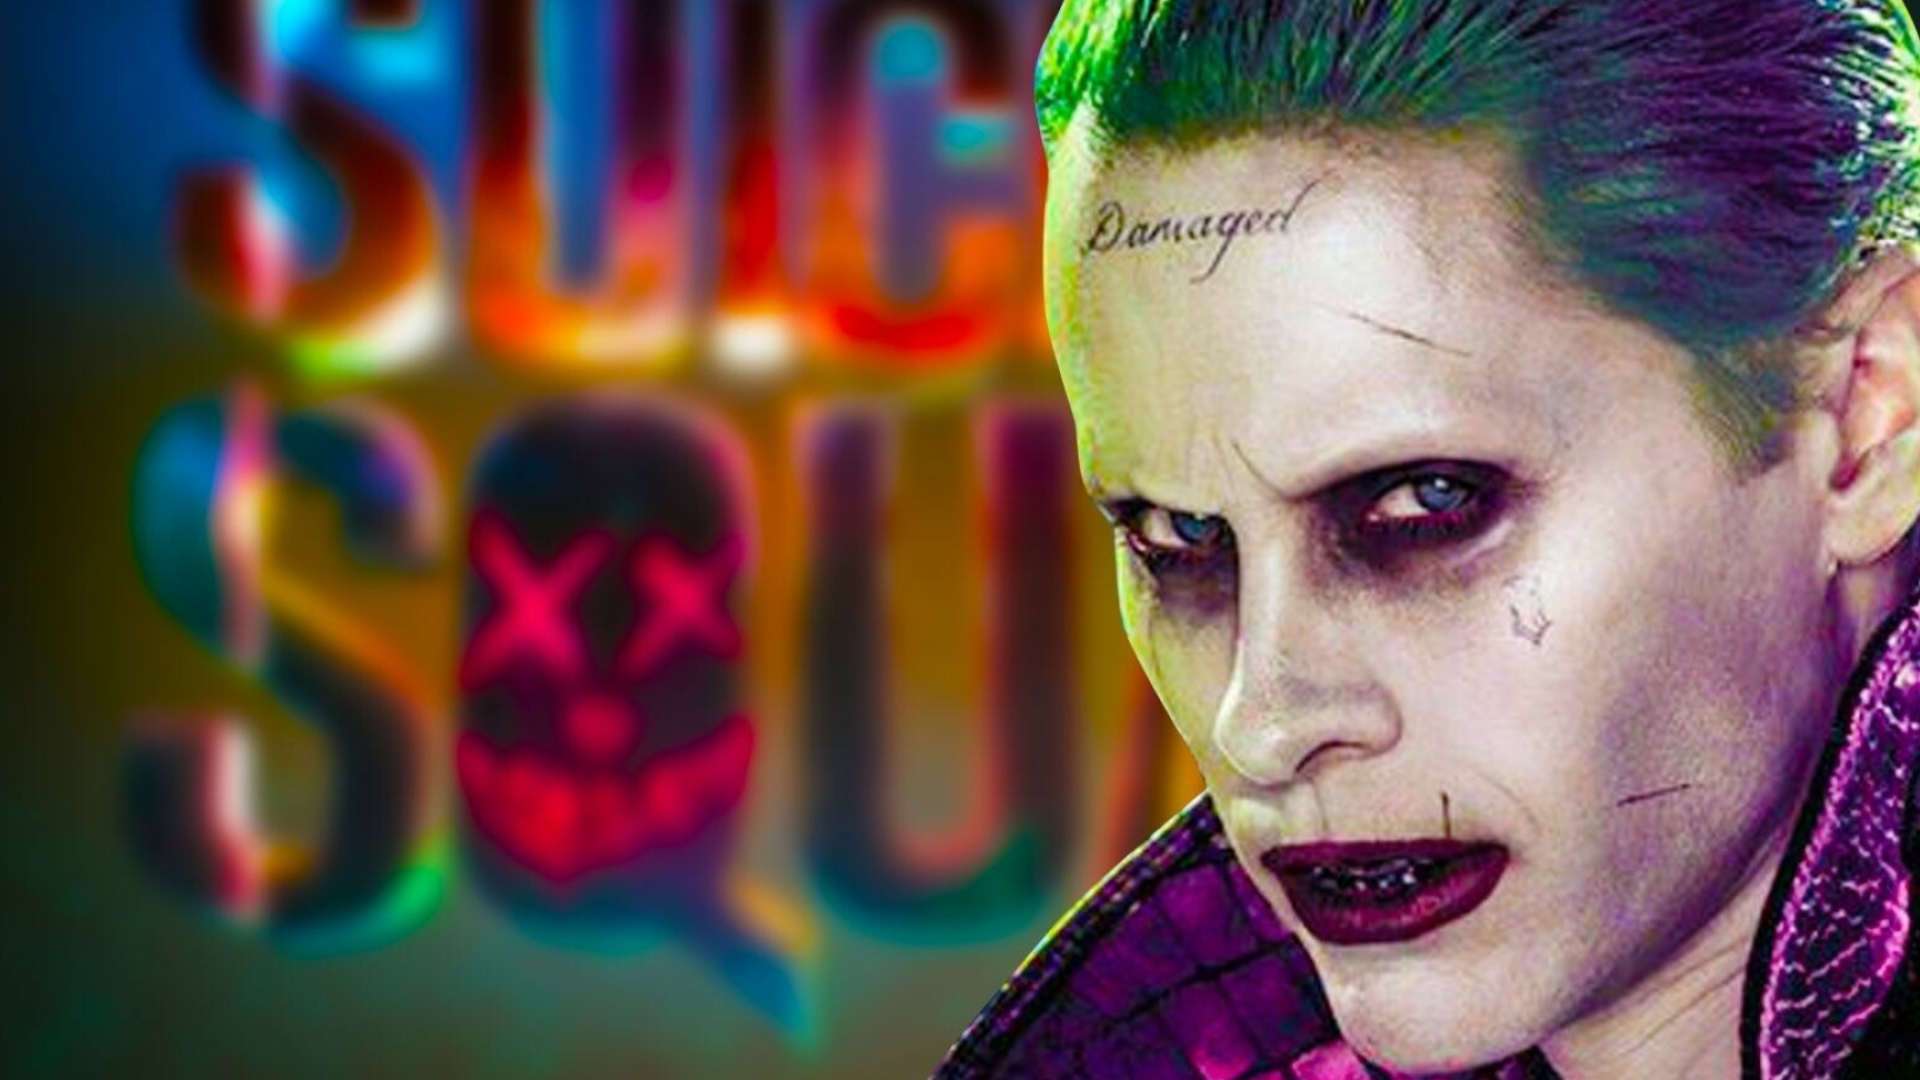 Suicide Squad: Jared Leto as the Joker, Supervillain. 1920x1080 Full HD Background.